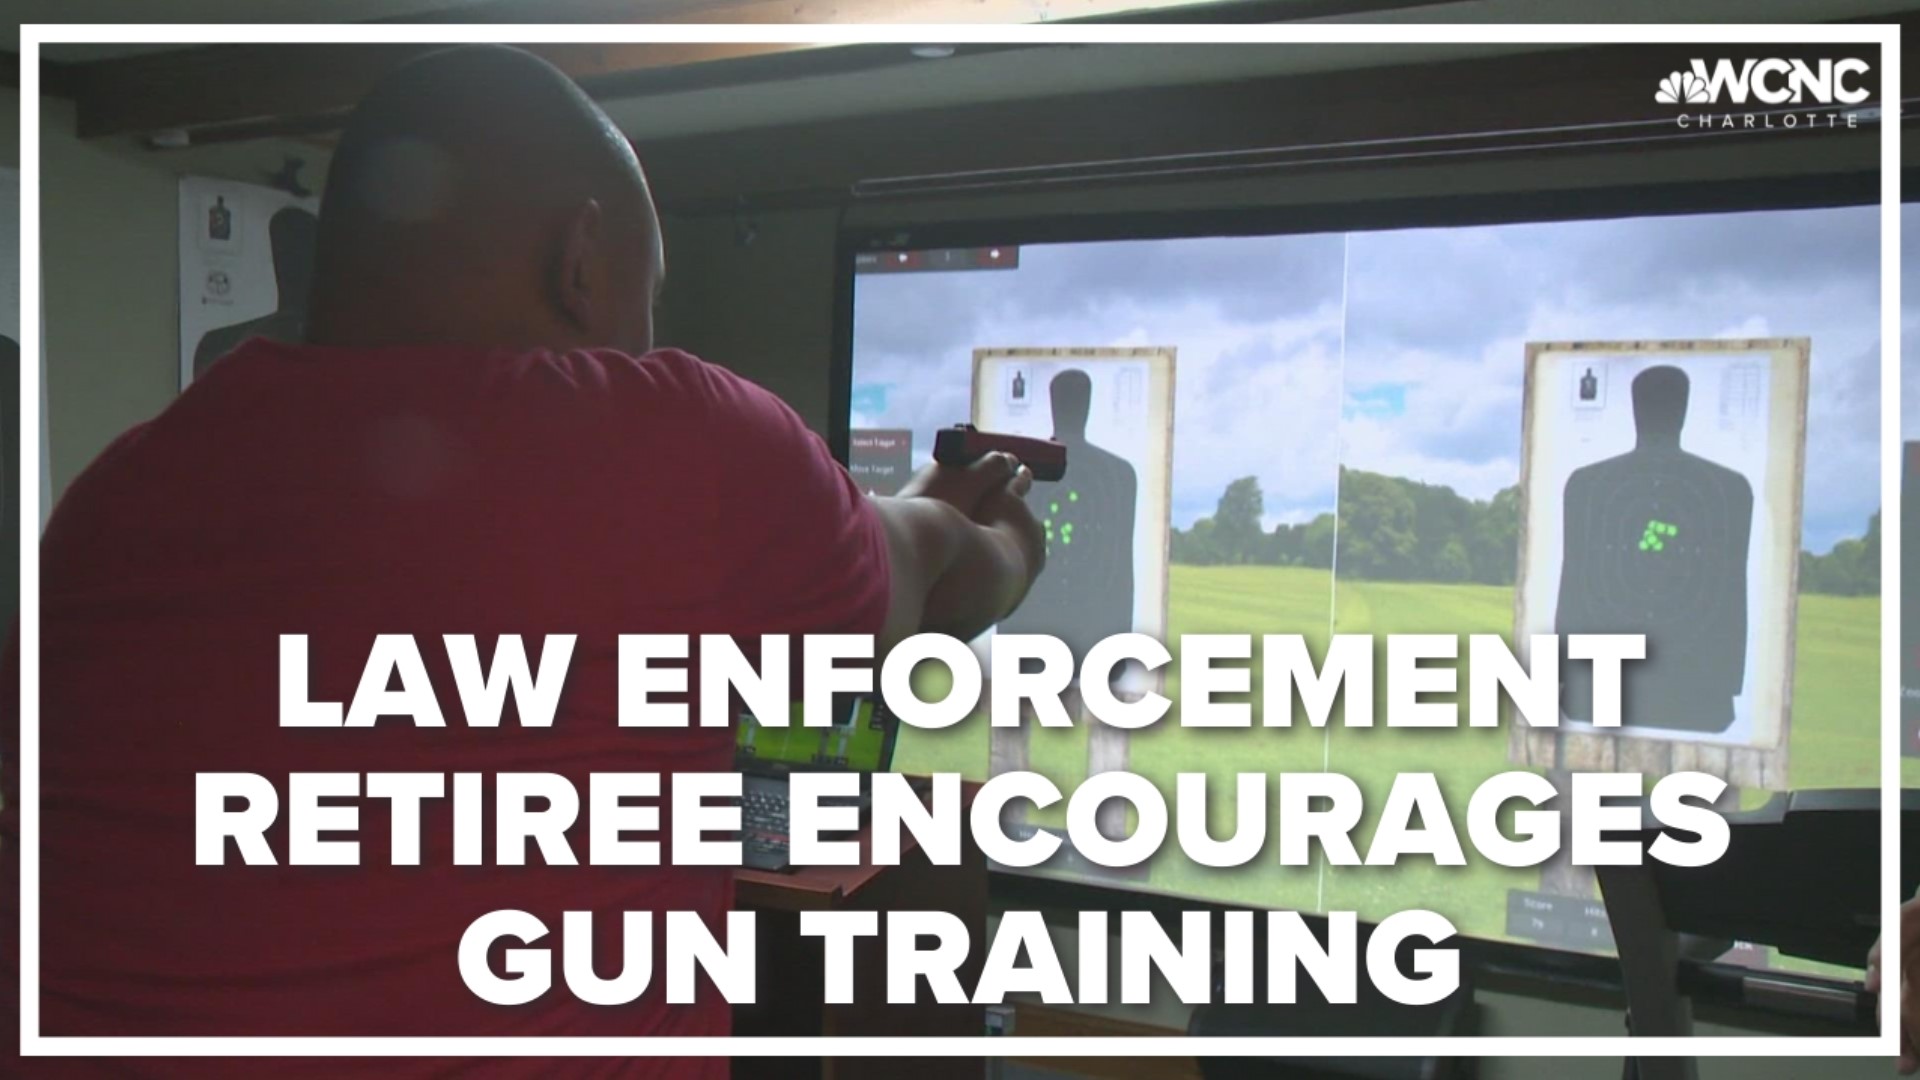 It generally takes eight hours of training to apply for a concealed carry license in the state. But some are raising red flags, saying this is not enough.